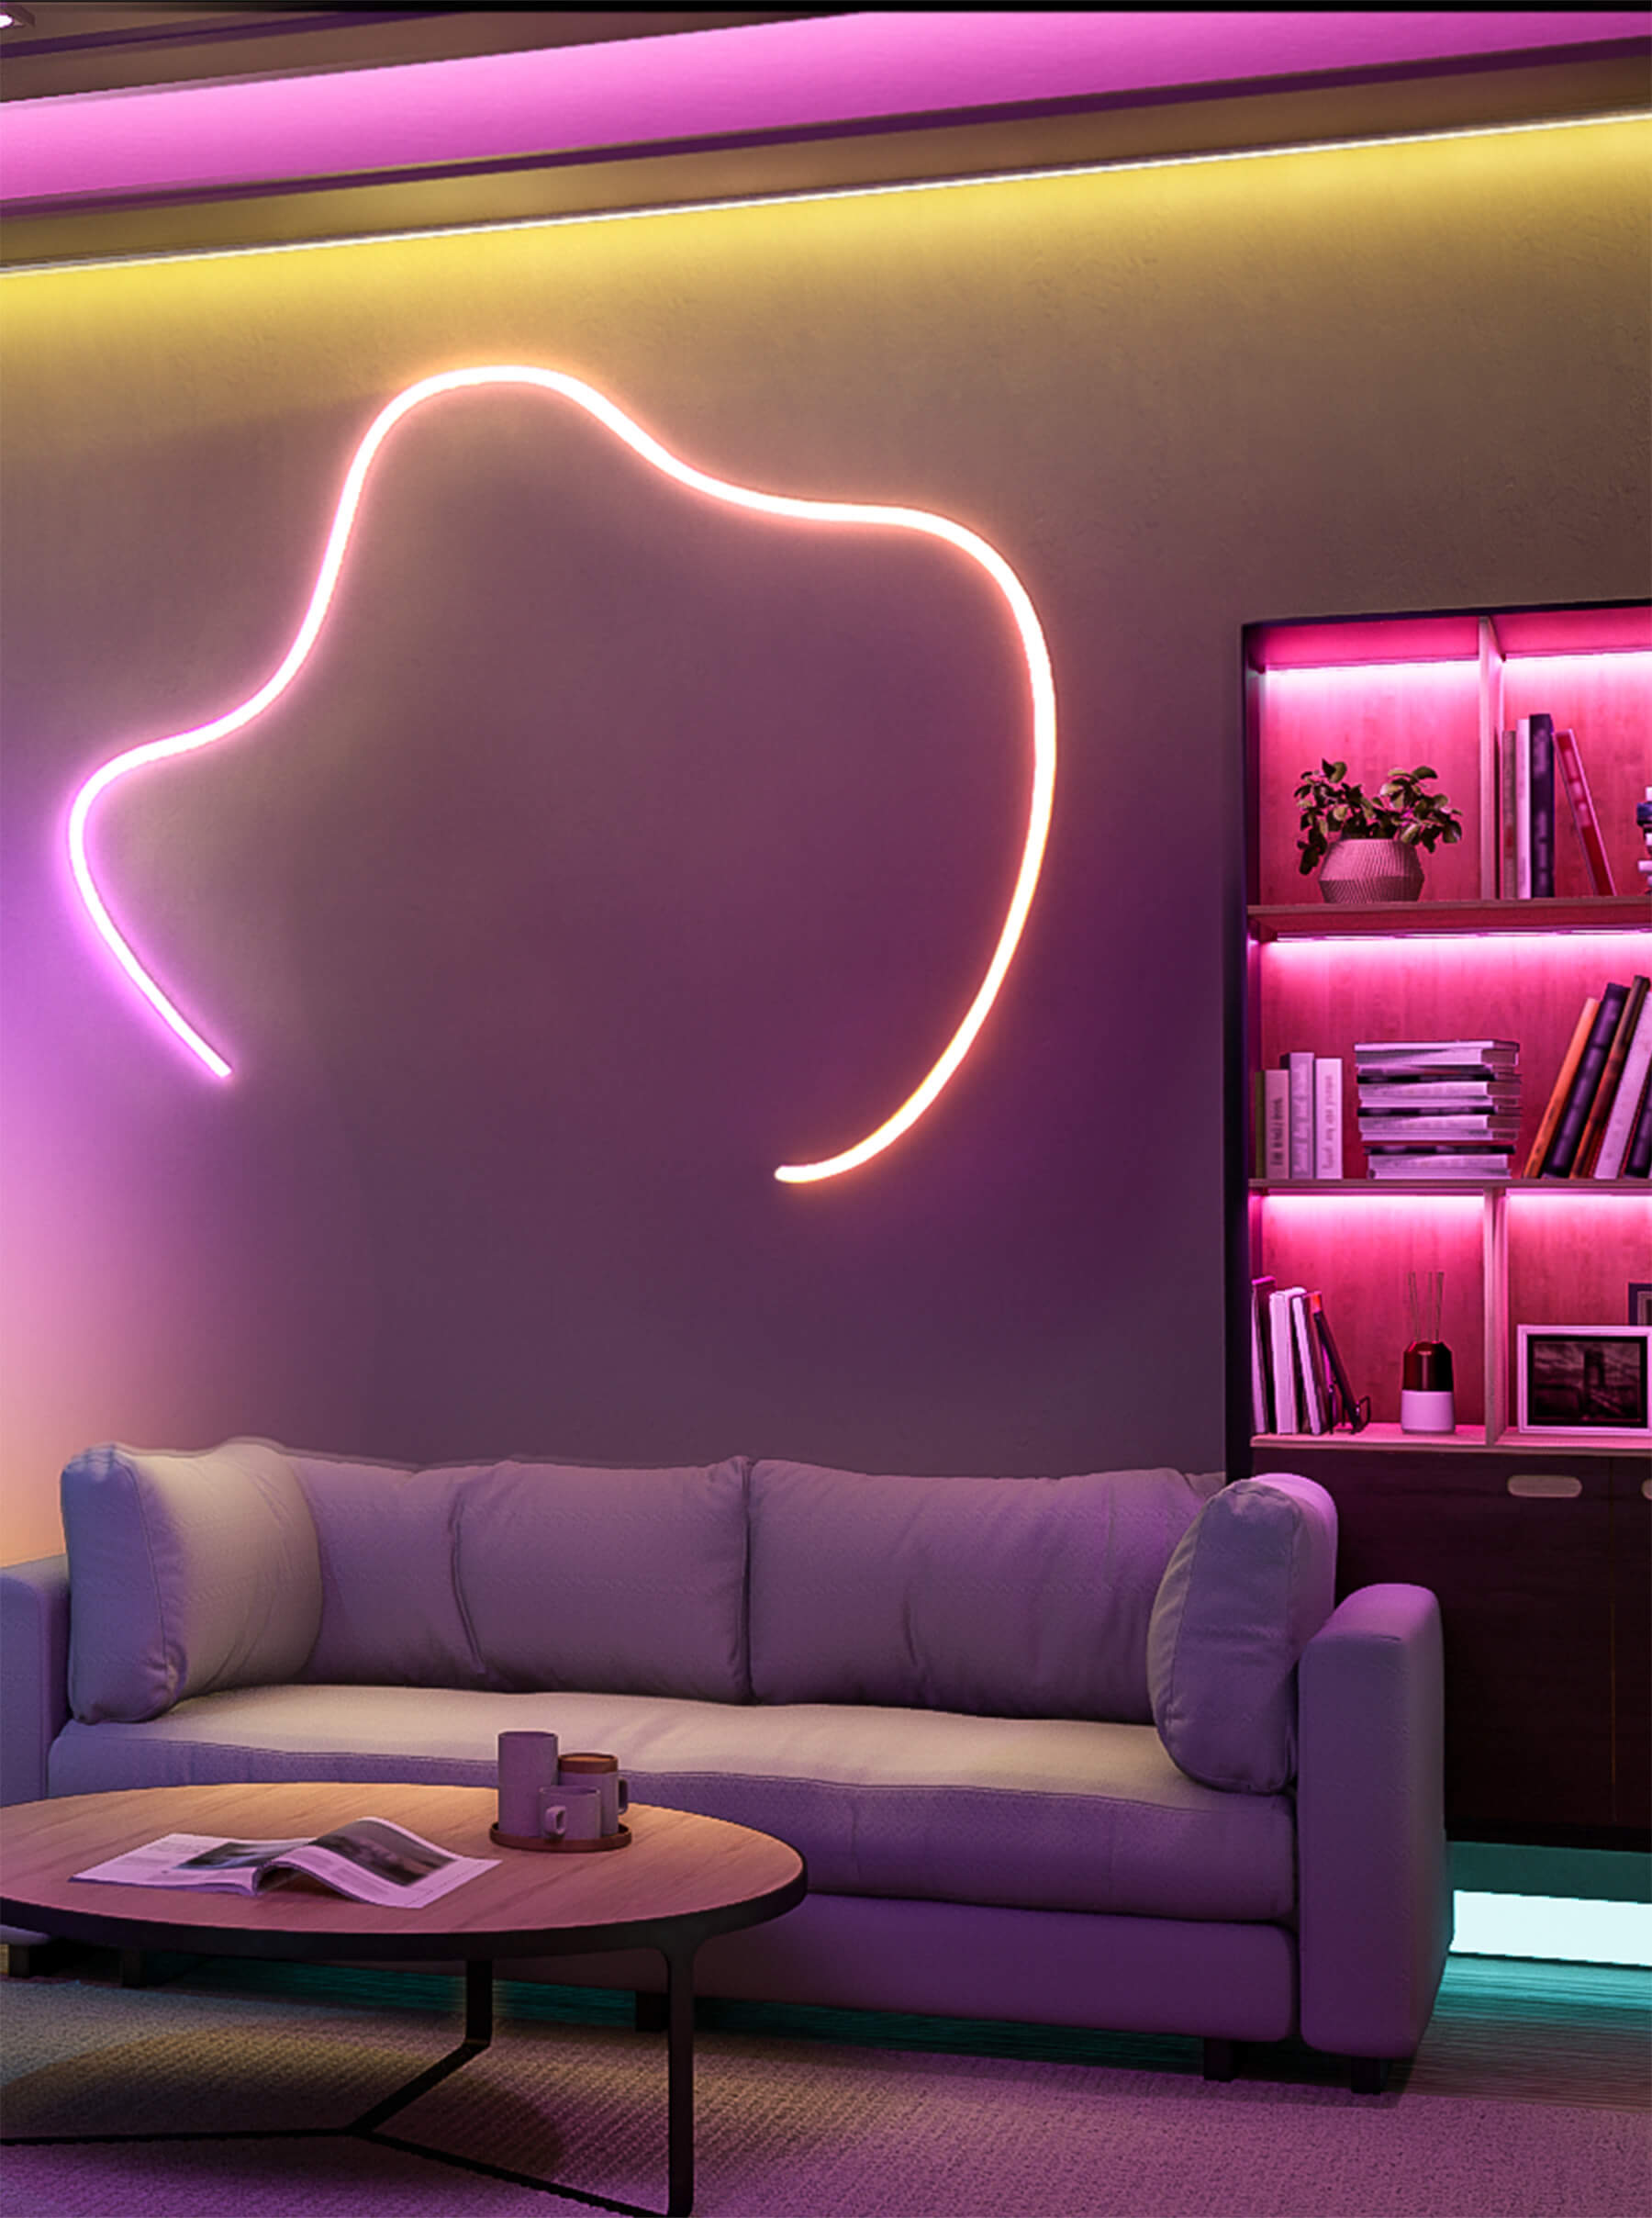 Light up your space with Muzata LED